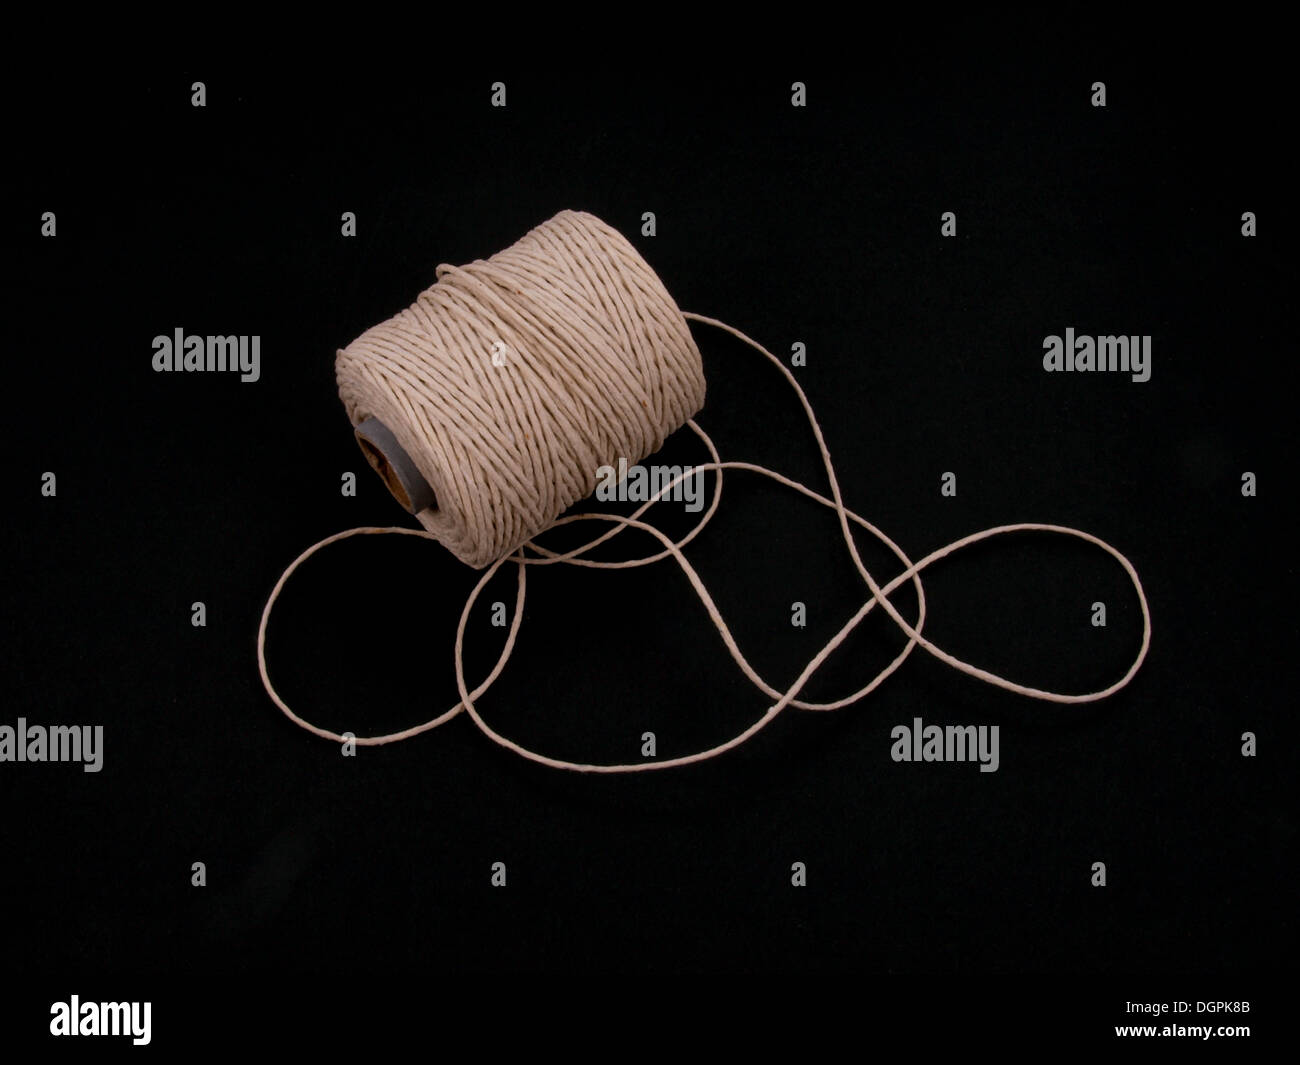 Ball of string or twine on a plain black background. Stock Photo